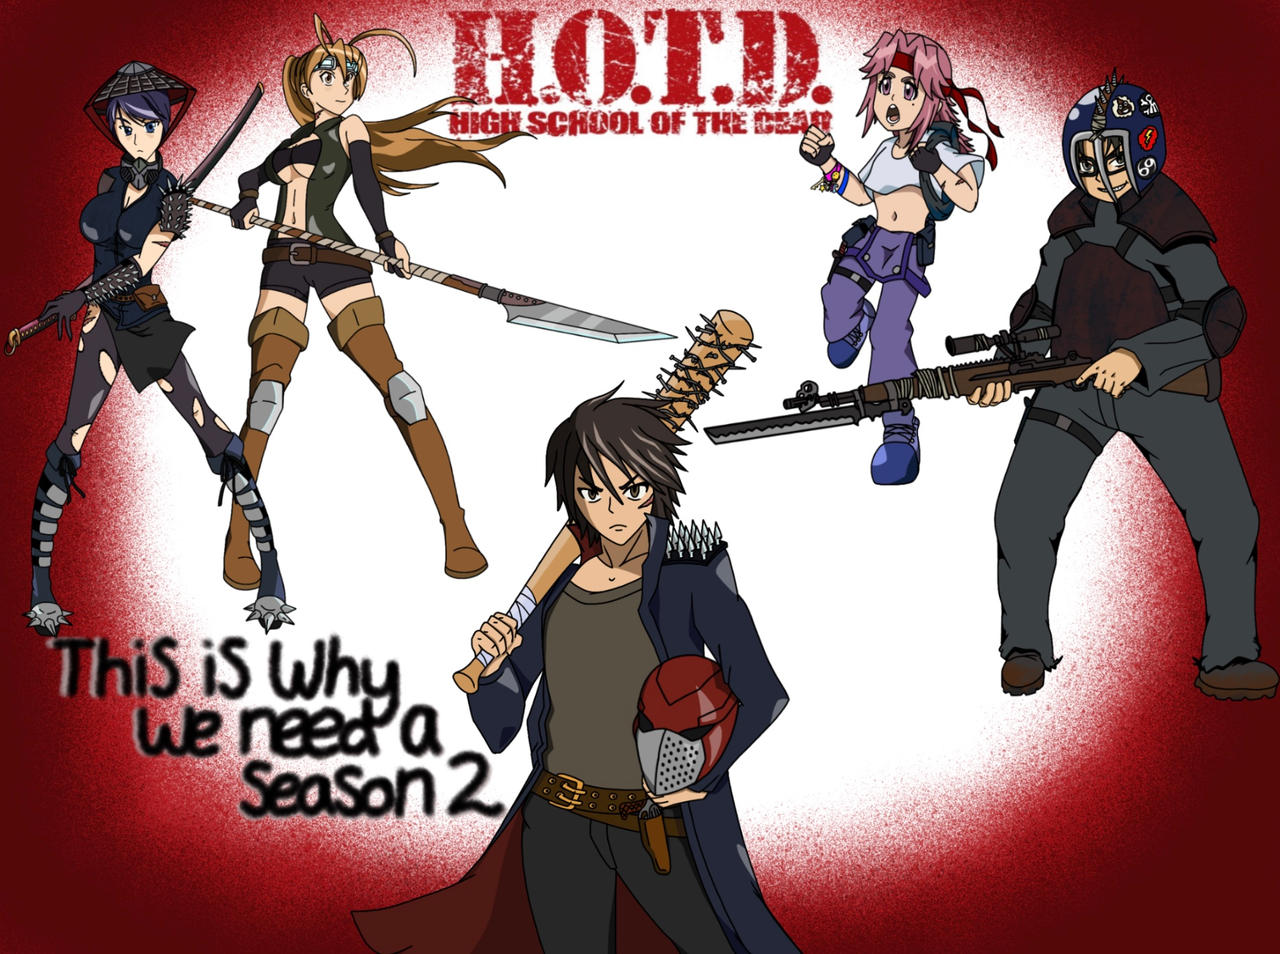 Do you think Highschool of the Dead would be way better if weren't